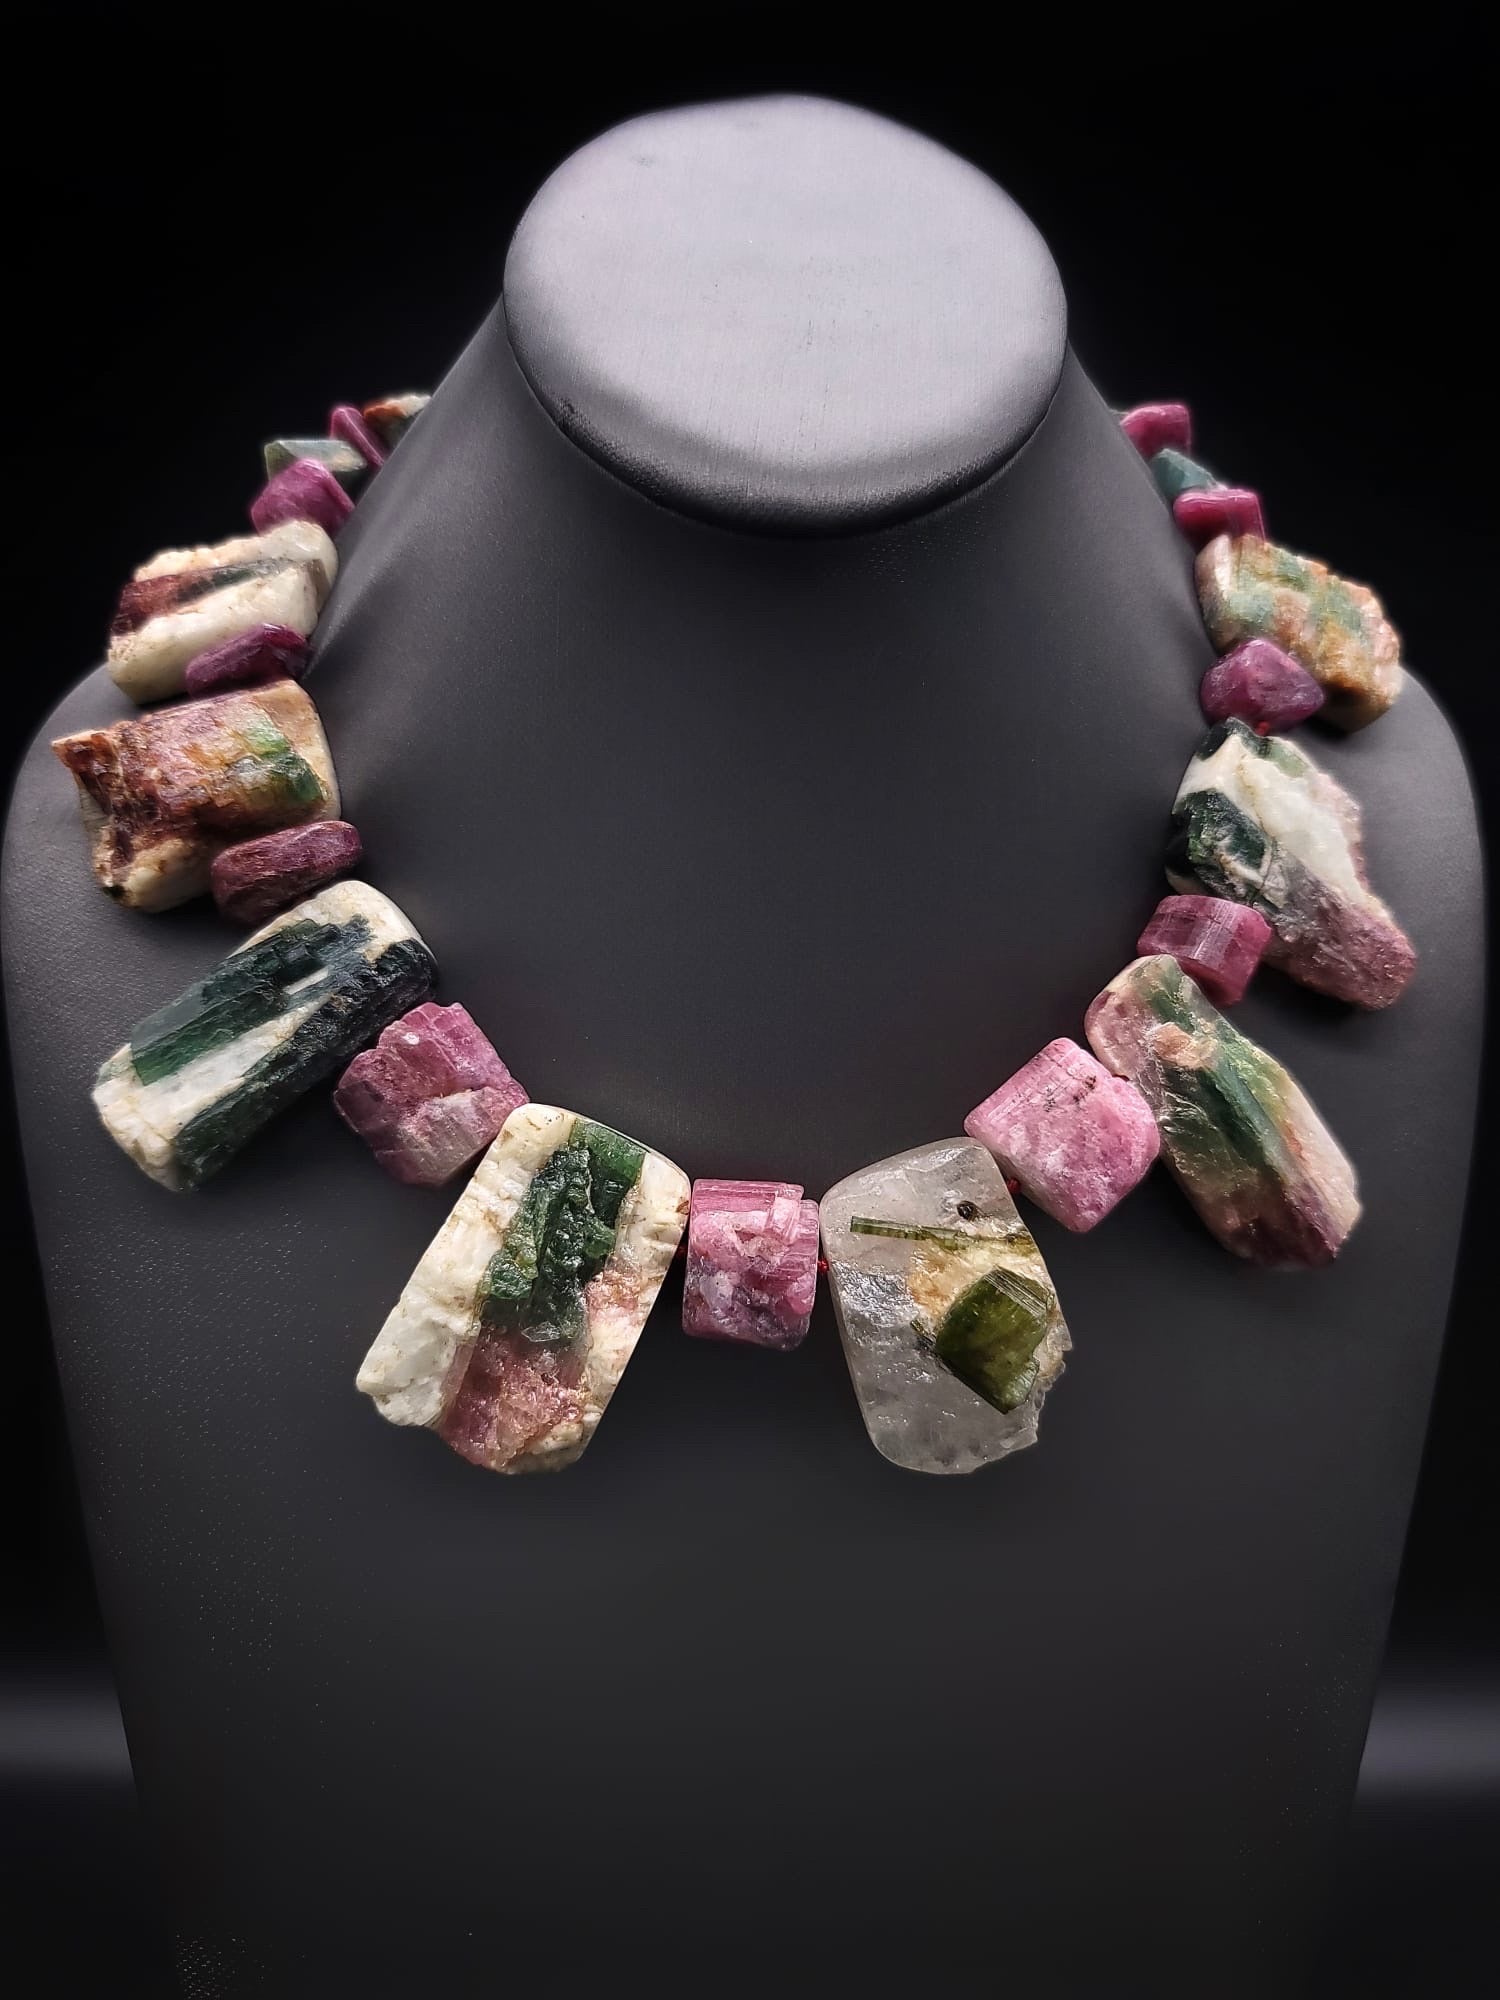 
Prepare to be enchanted by the breathtaking beauty of our one-of-a-kind Watermelon Tourmaline necklace. This spectacular piece features a mesmerizing collection of mixed-colored natural Watermelon Tourmaline stones, each carefully matched within